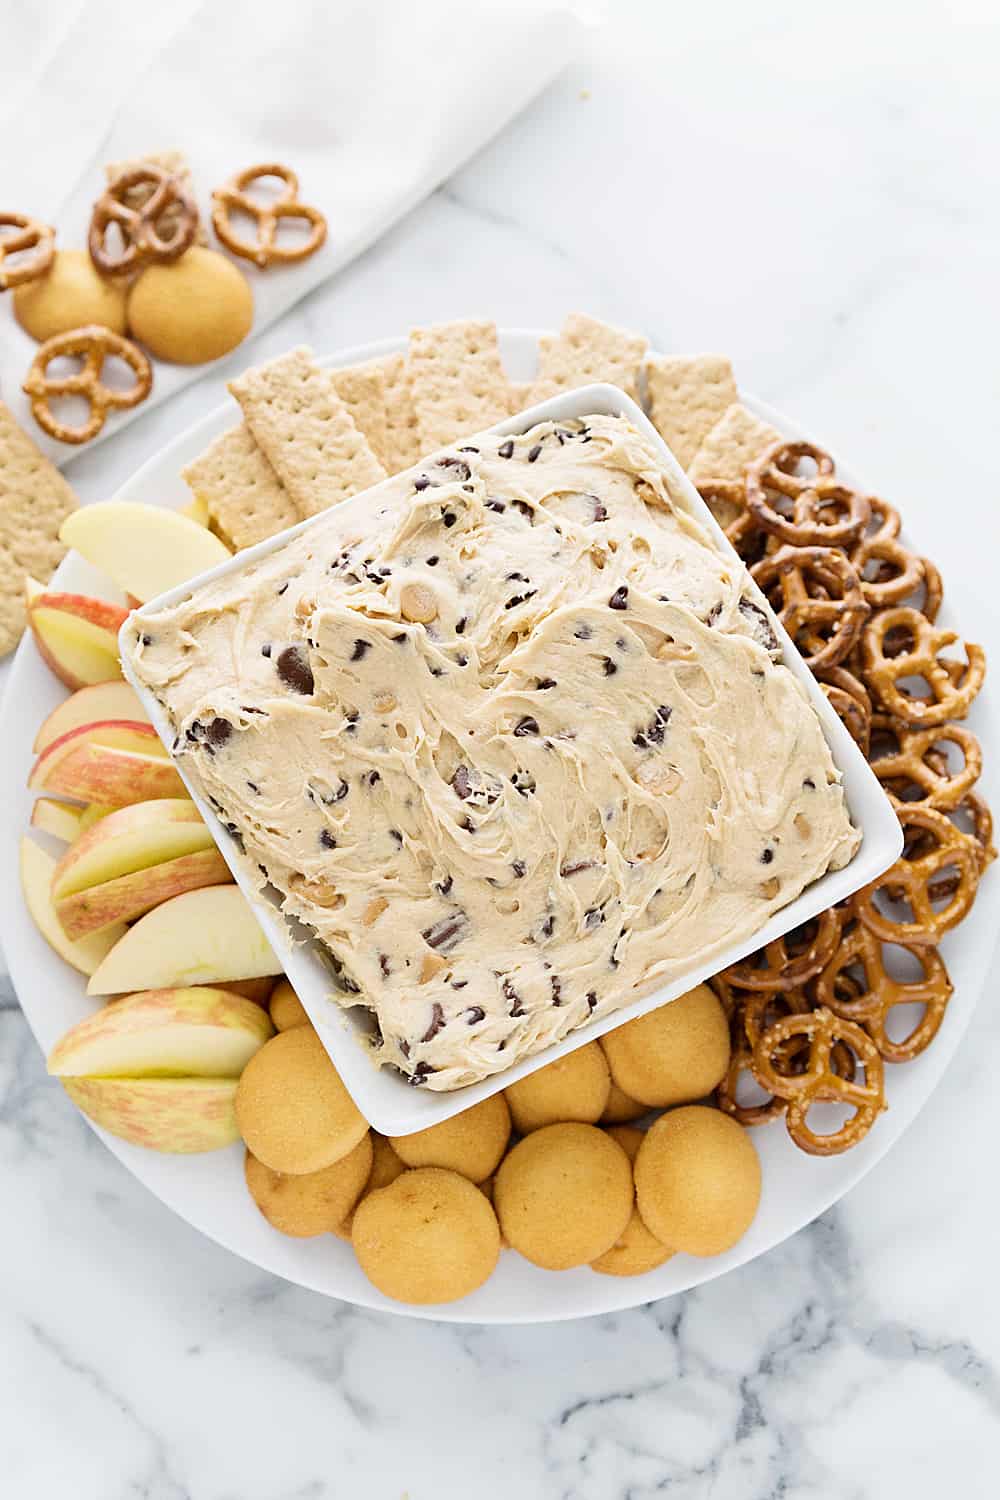 Peanut Butter Cookie Dough Dip with apple slices and pretzels.